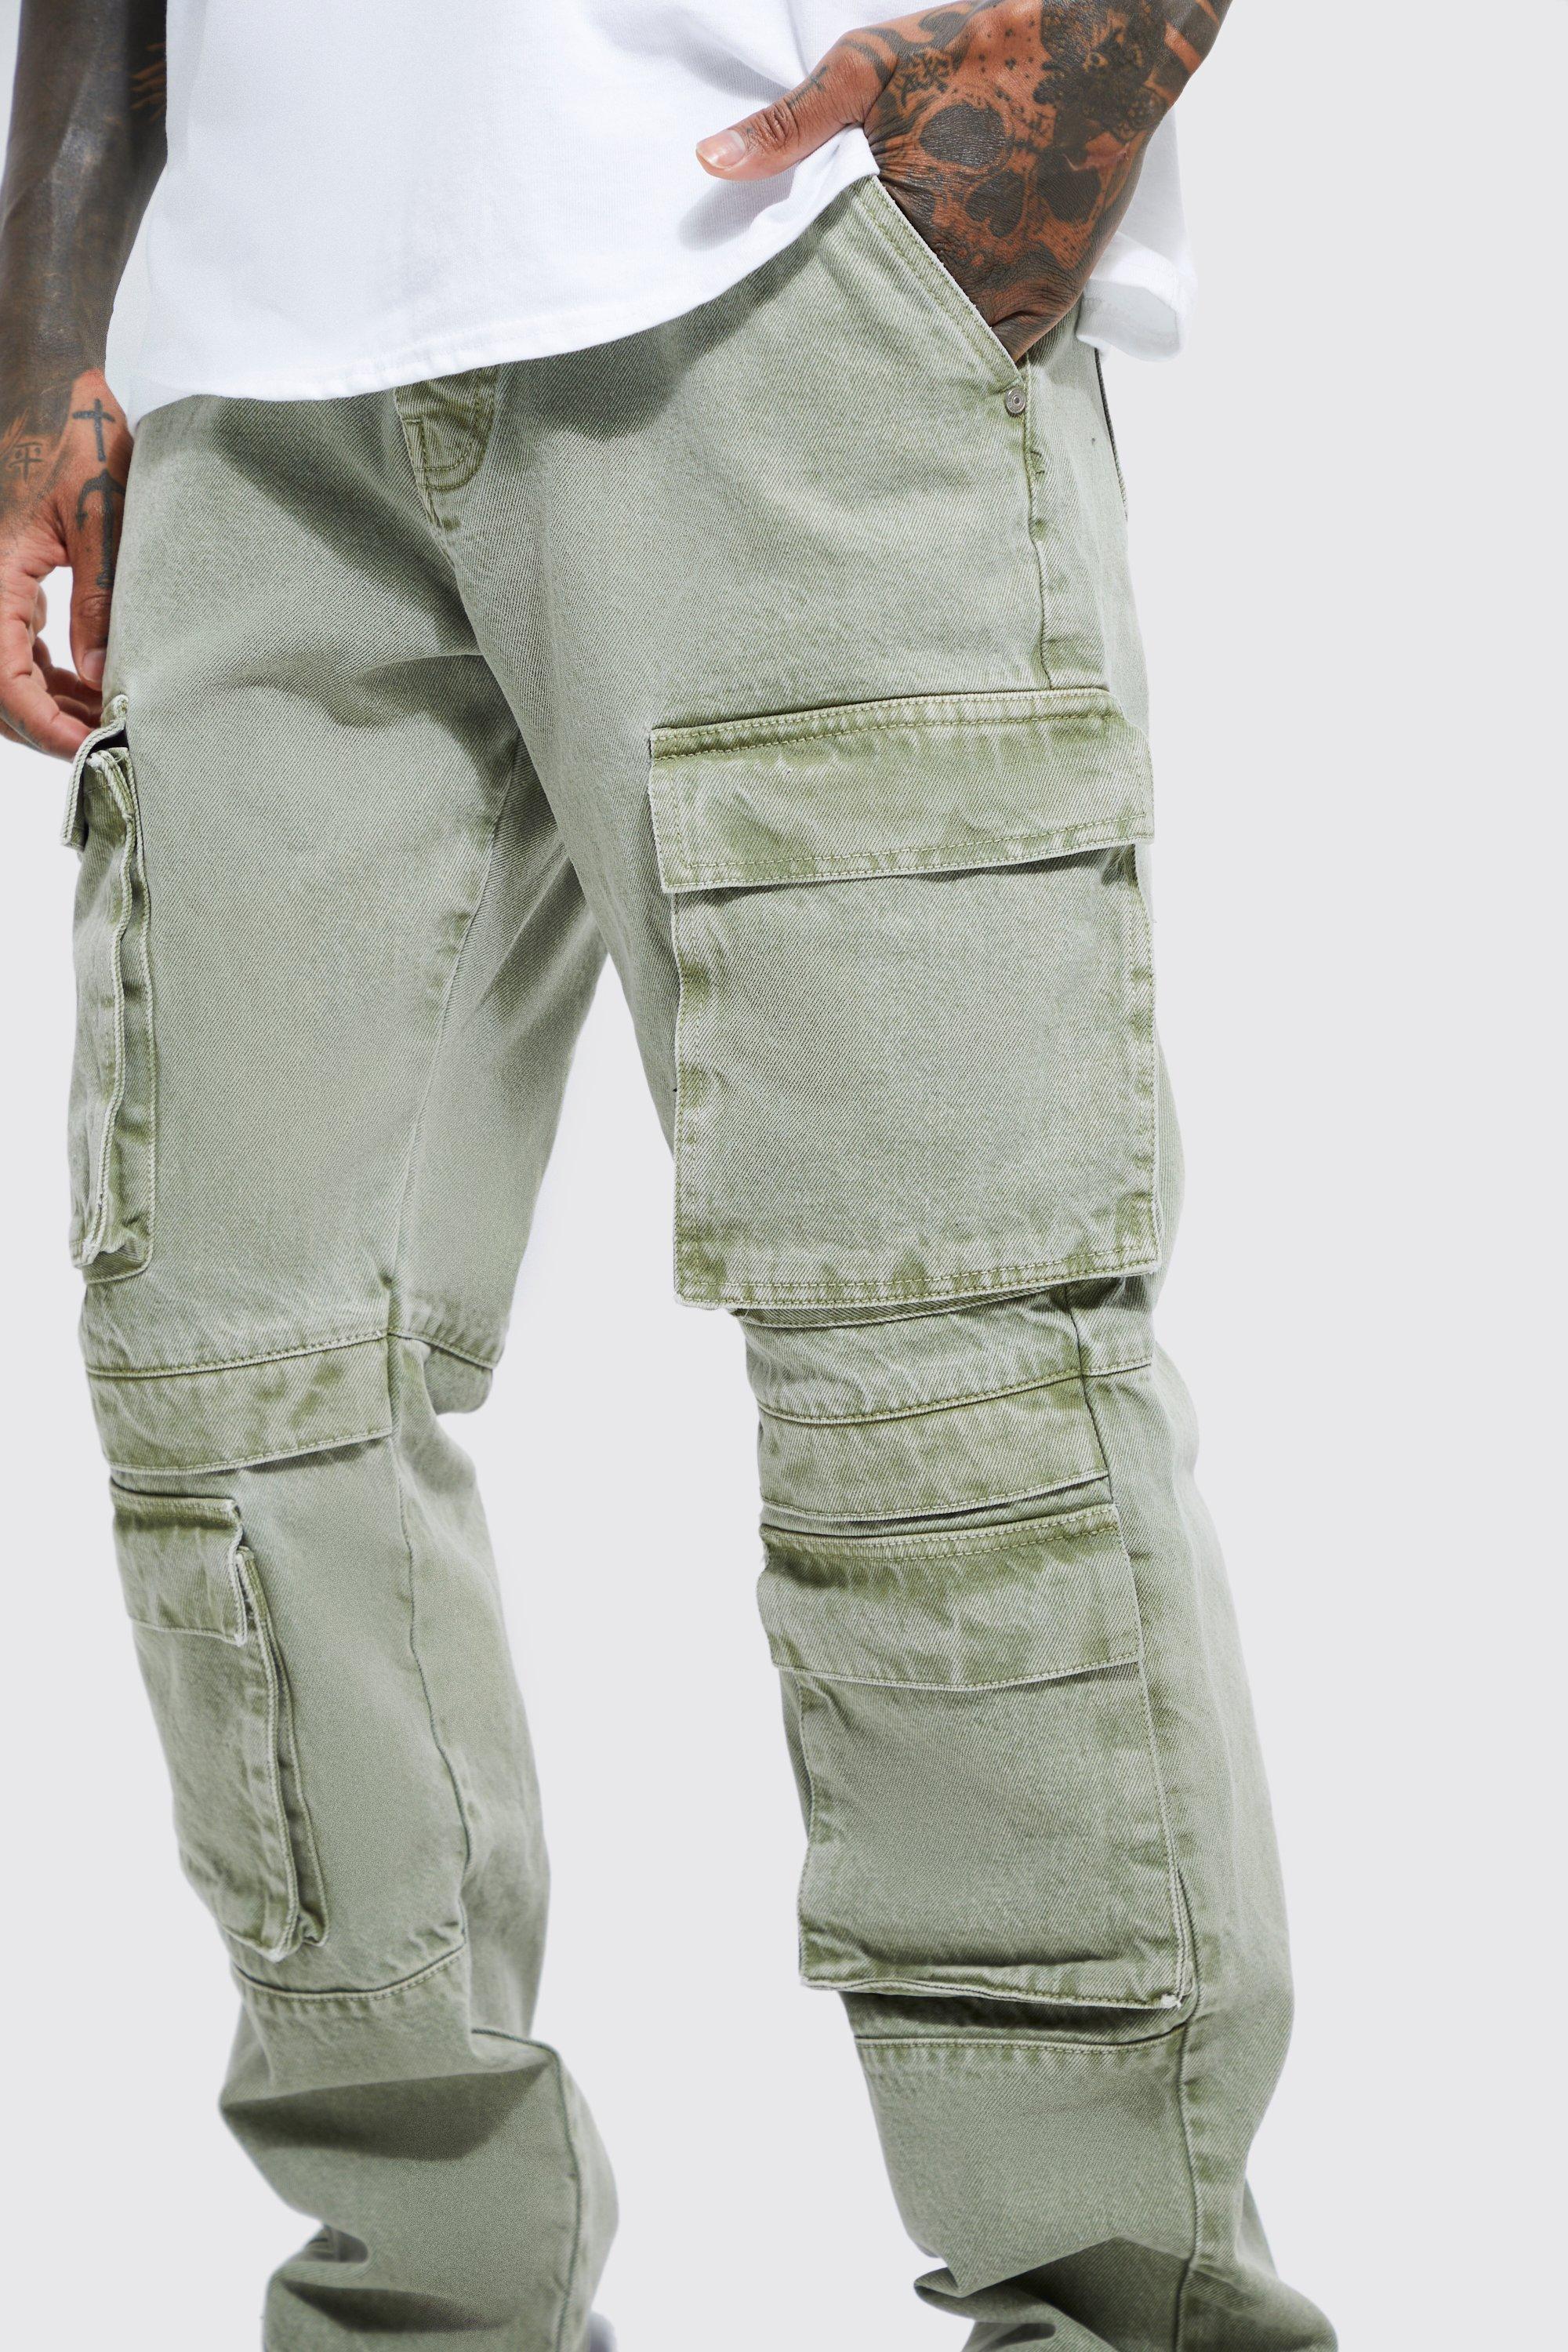 Cargo Pants Men with Multiple Pockets Jogging Pants Outdoor